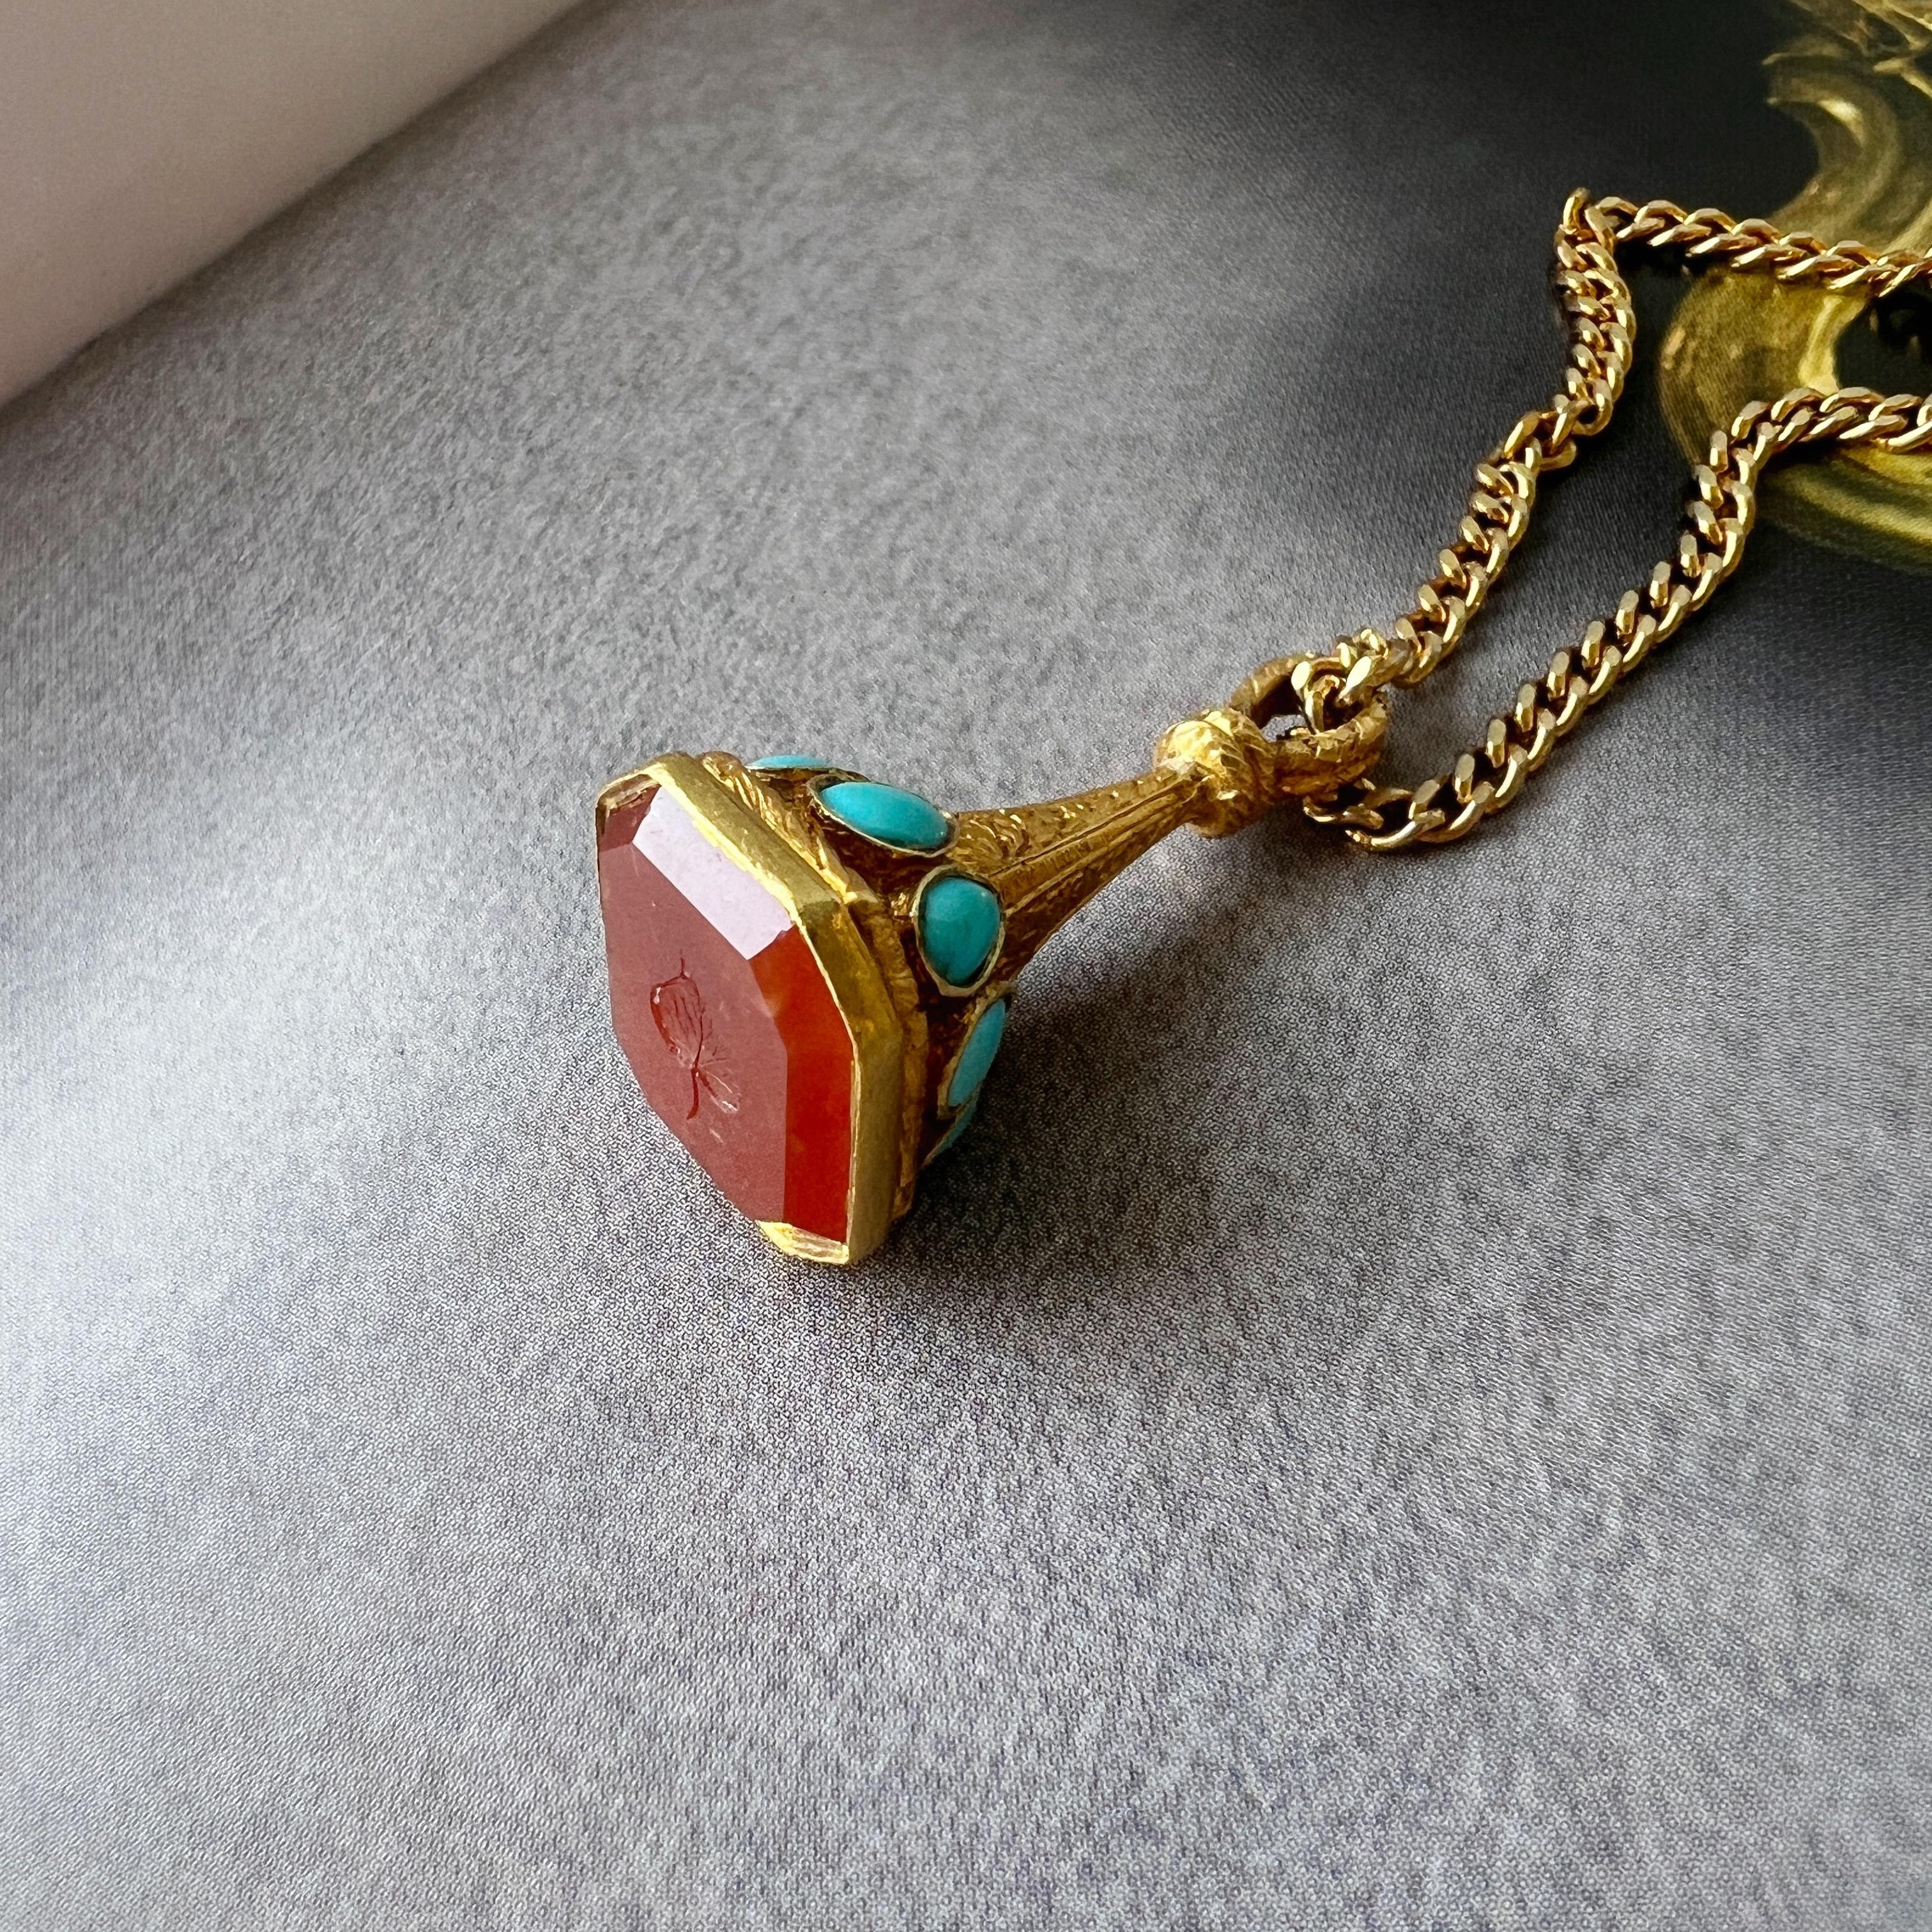 Antique 18K gold turquoise carnelian seal fob pendant “as free as a leaf” For Sale 5